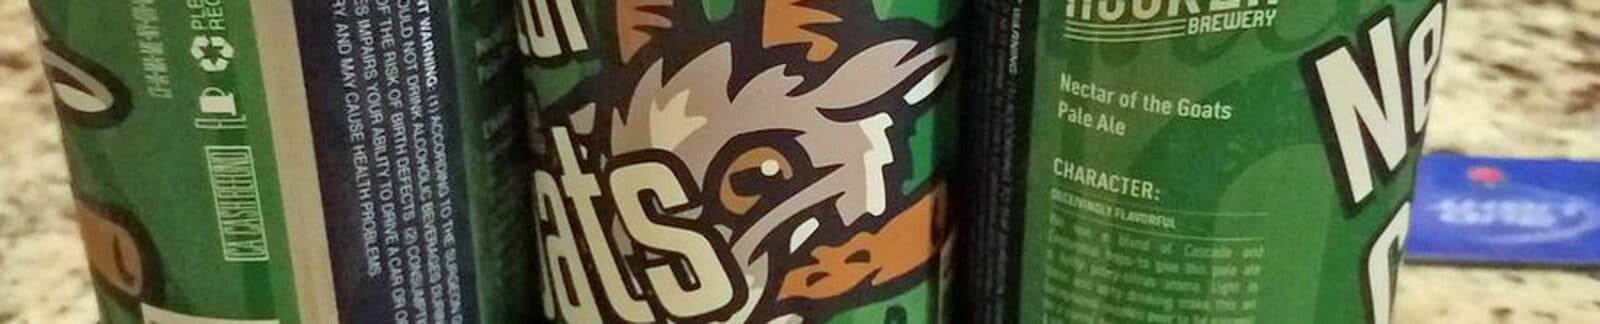 Nectar of the Goats Pale Ale header